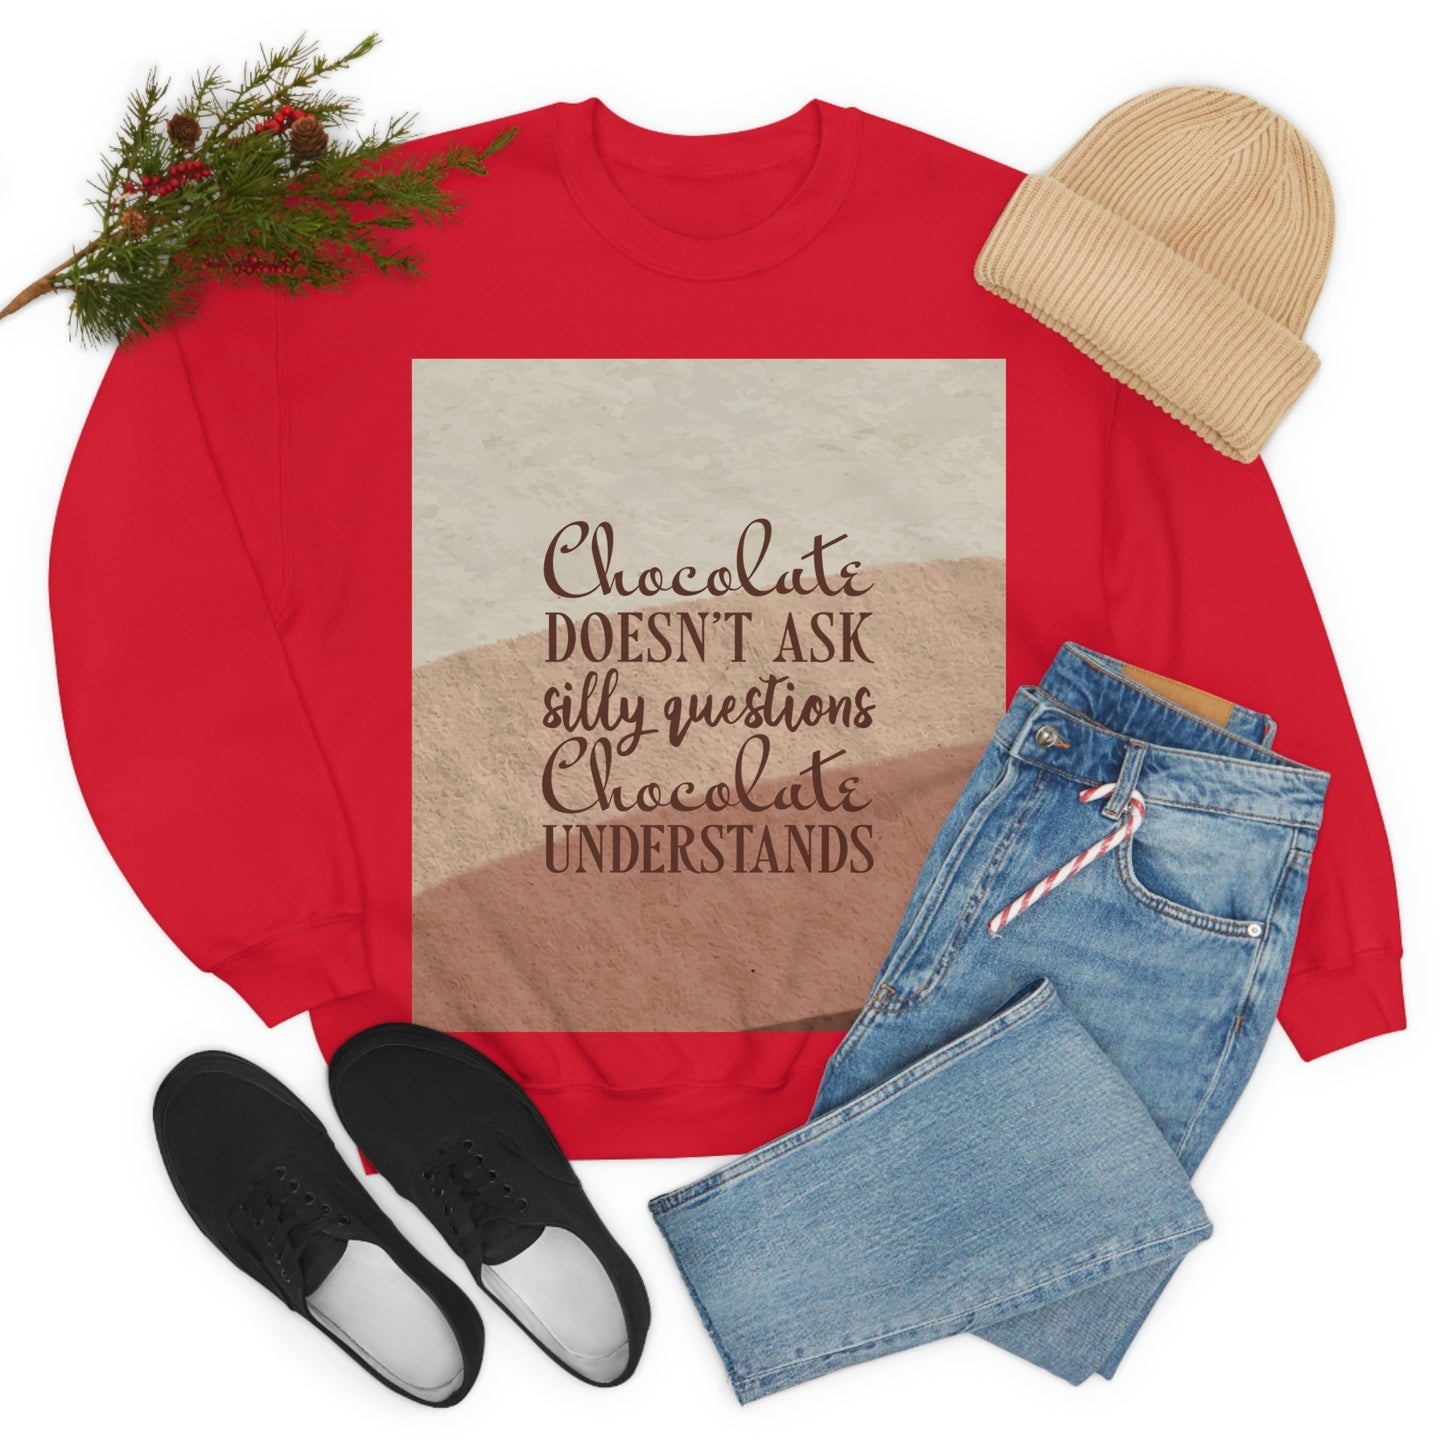 Chocolate Doesn’t Ask Questions Indulge in the Sweetness  Unisex Heavy Blend™ Crewneck Sweatshirt